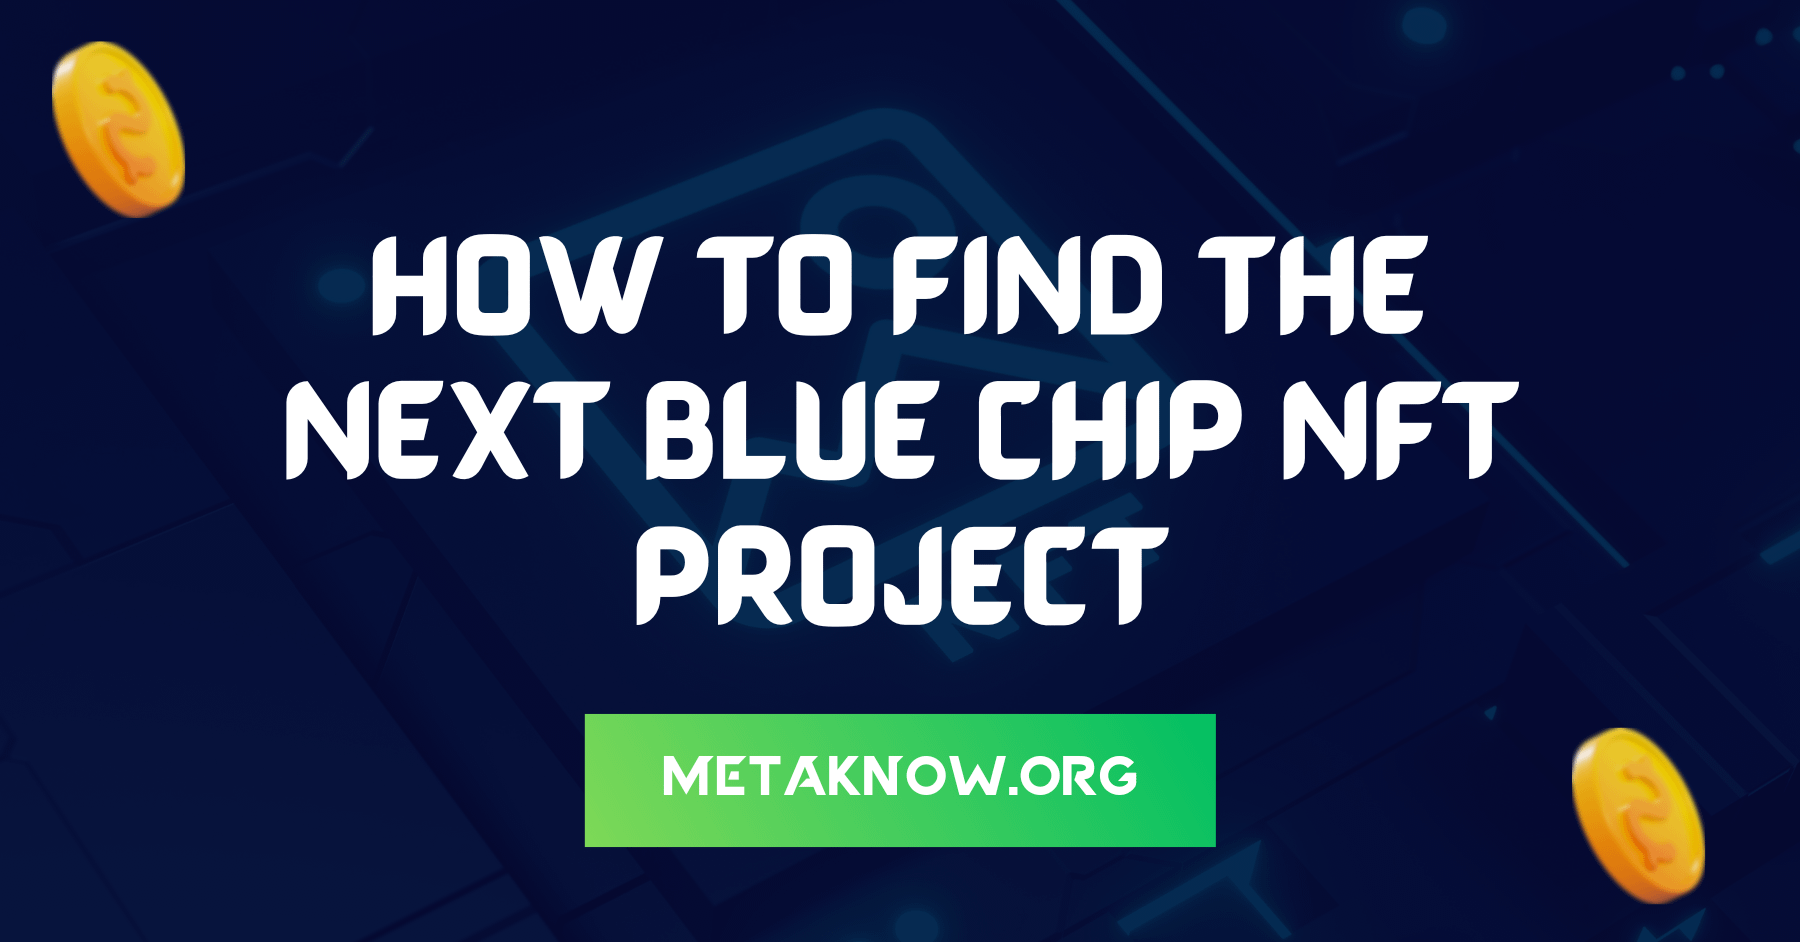 How to Find the Next Blue Chip NFT Project